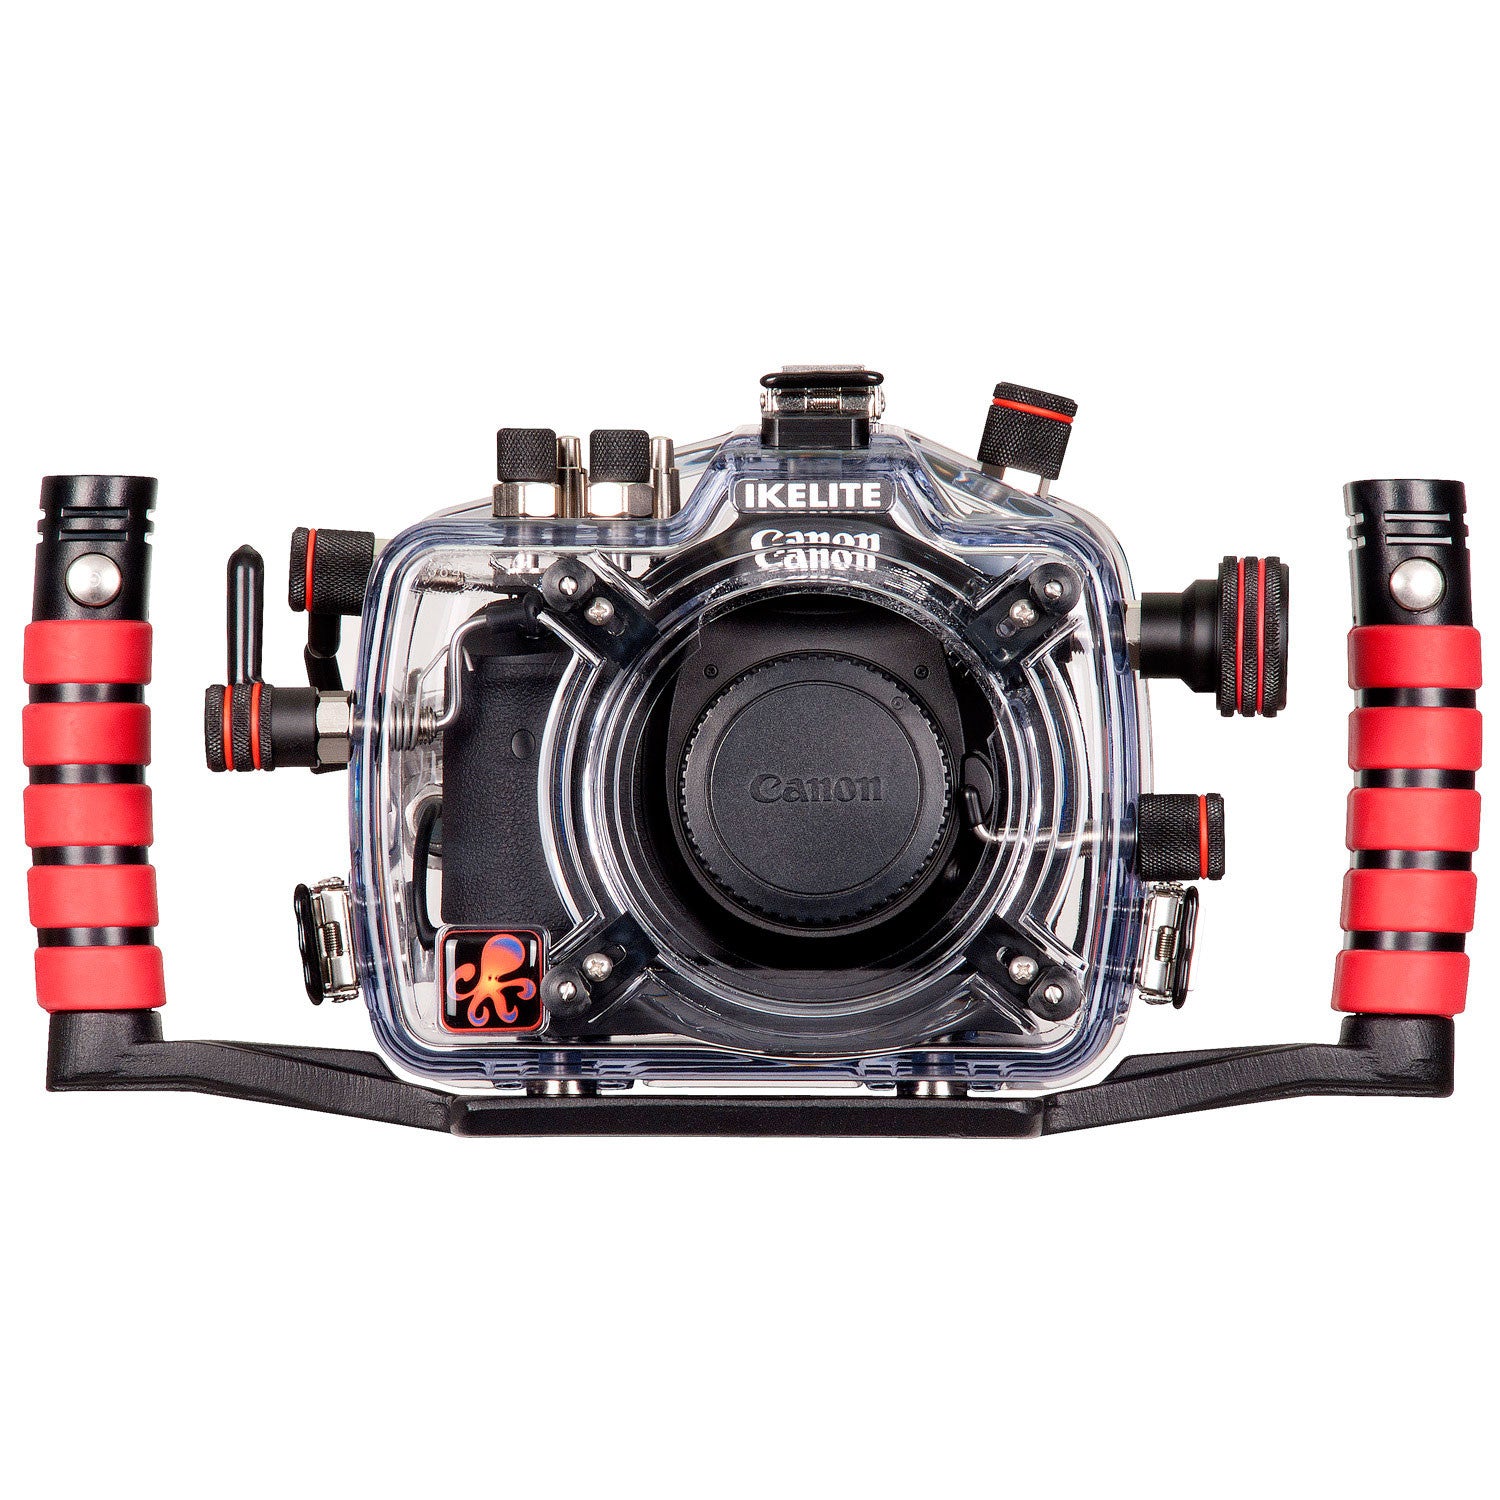 Underwater Housing for Canon EOS 7D